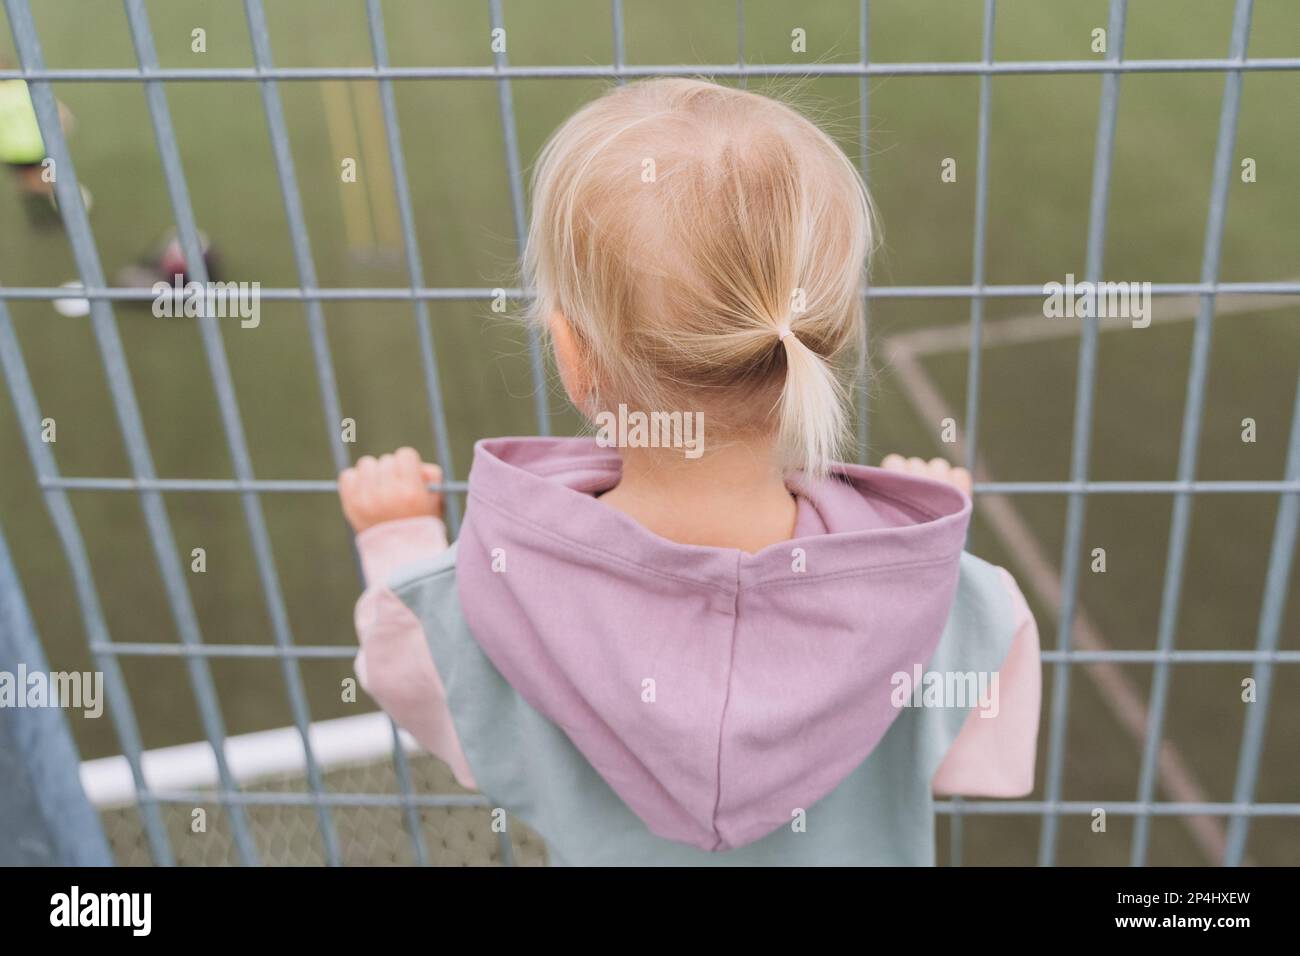 Cute ponytail of a little blonde girl, back view Stock Photo